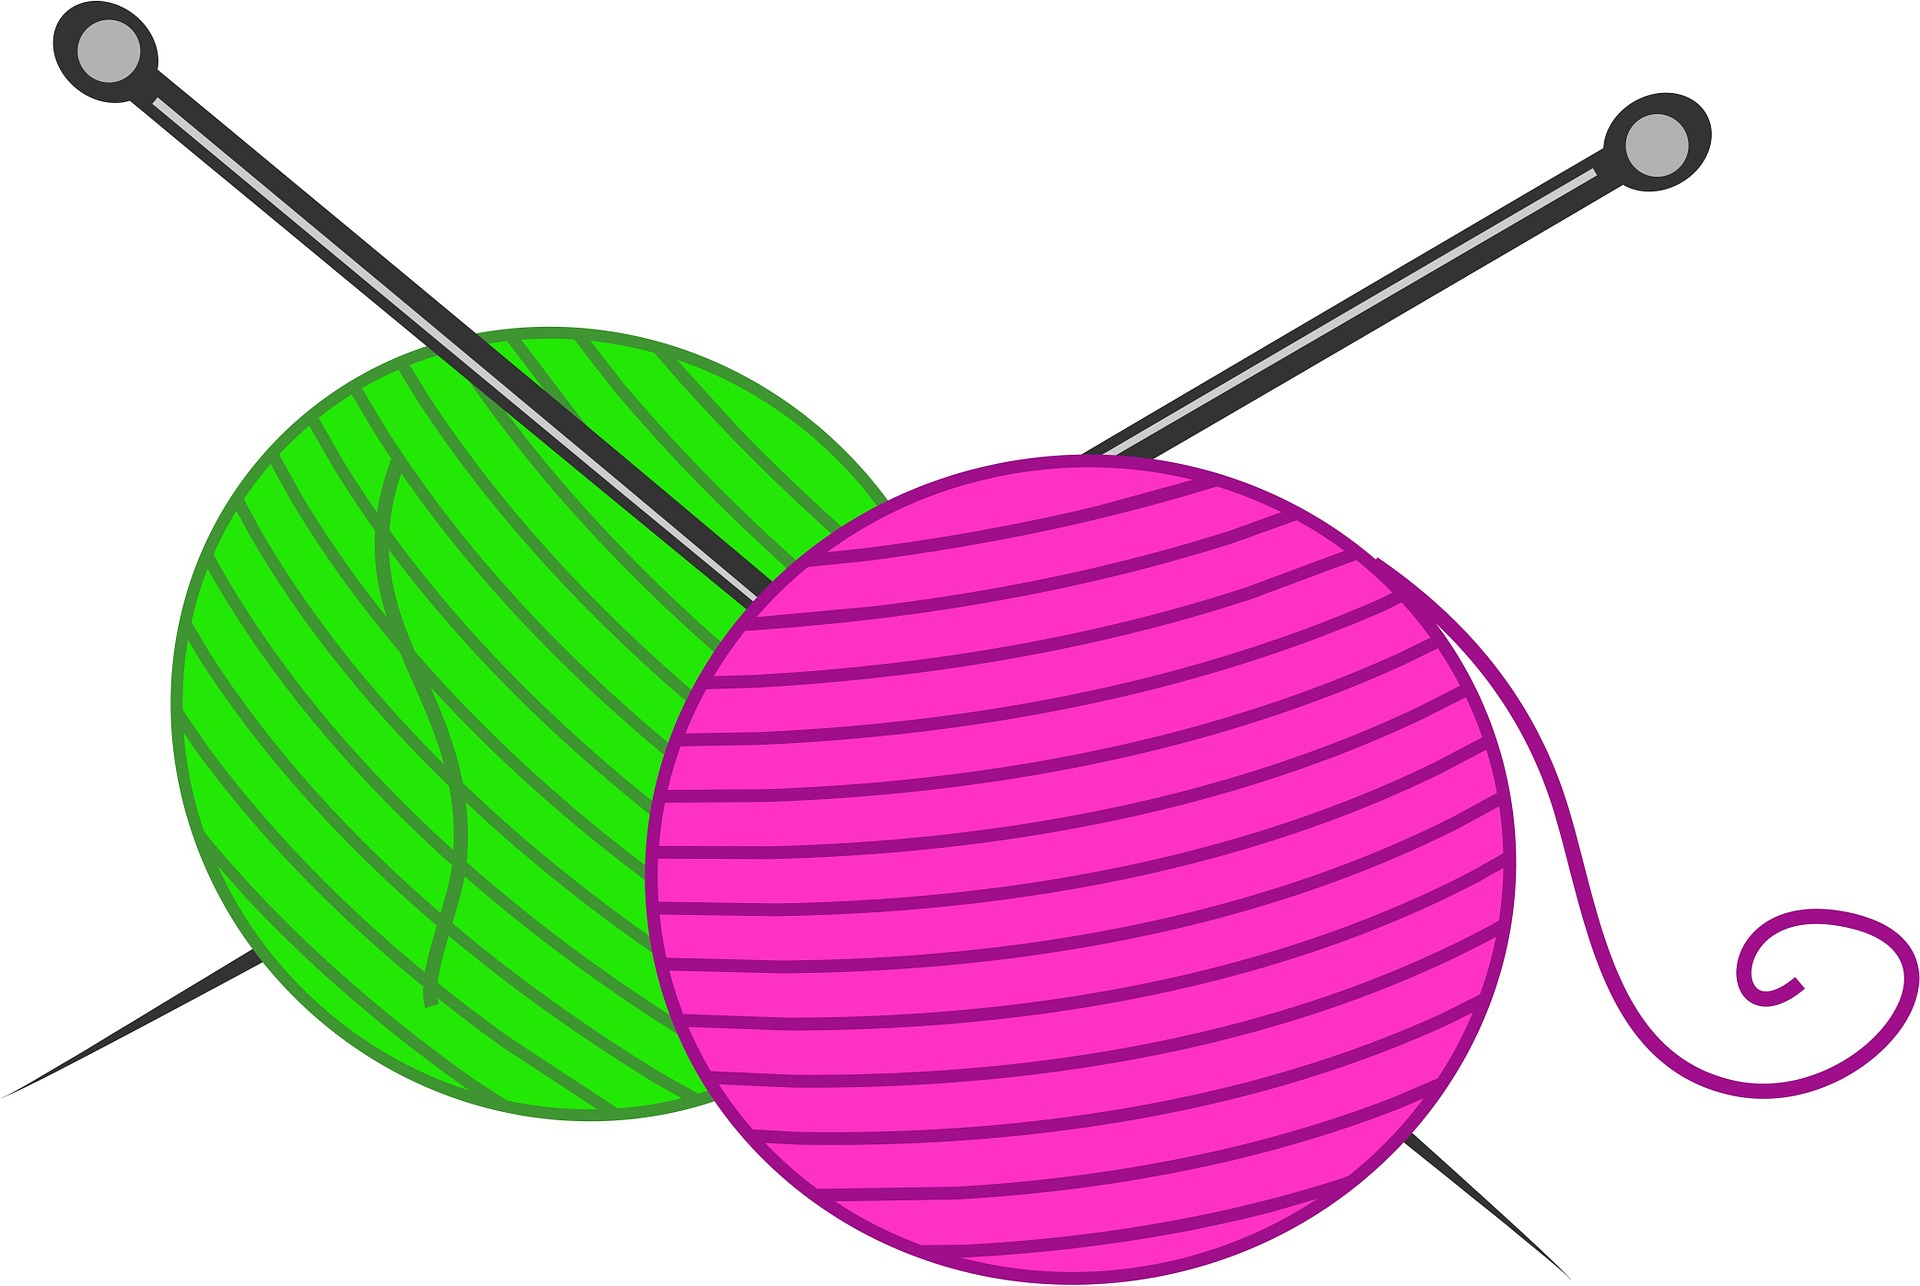 ilustration of knitting needkes on a wool ball